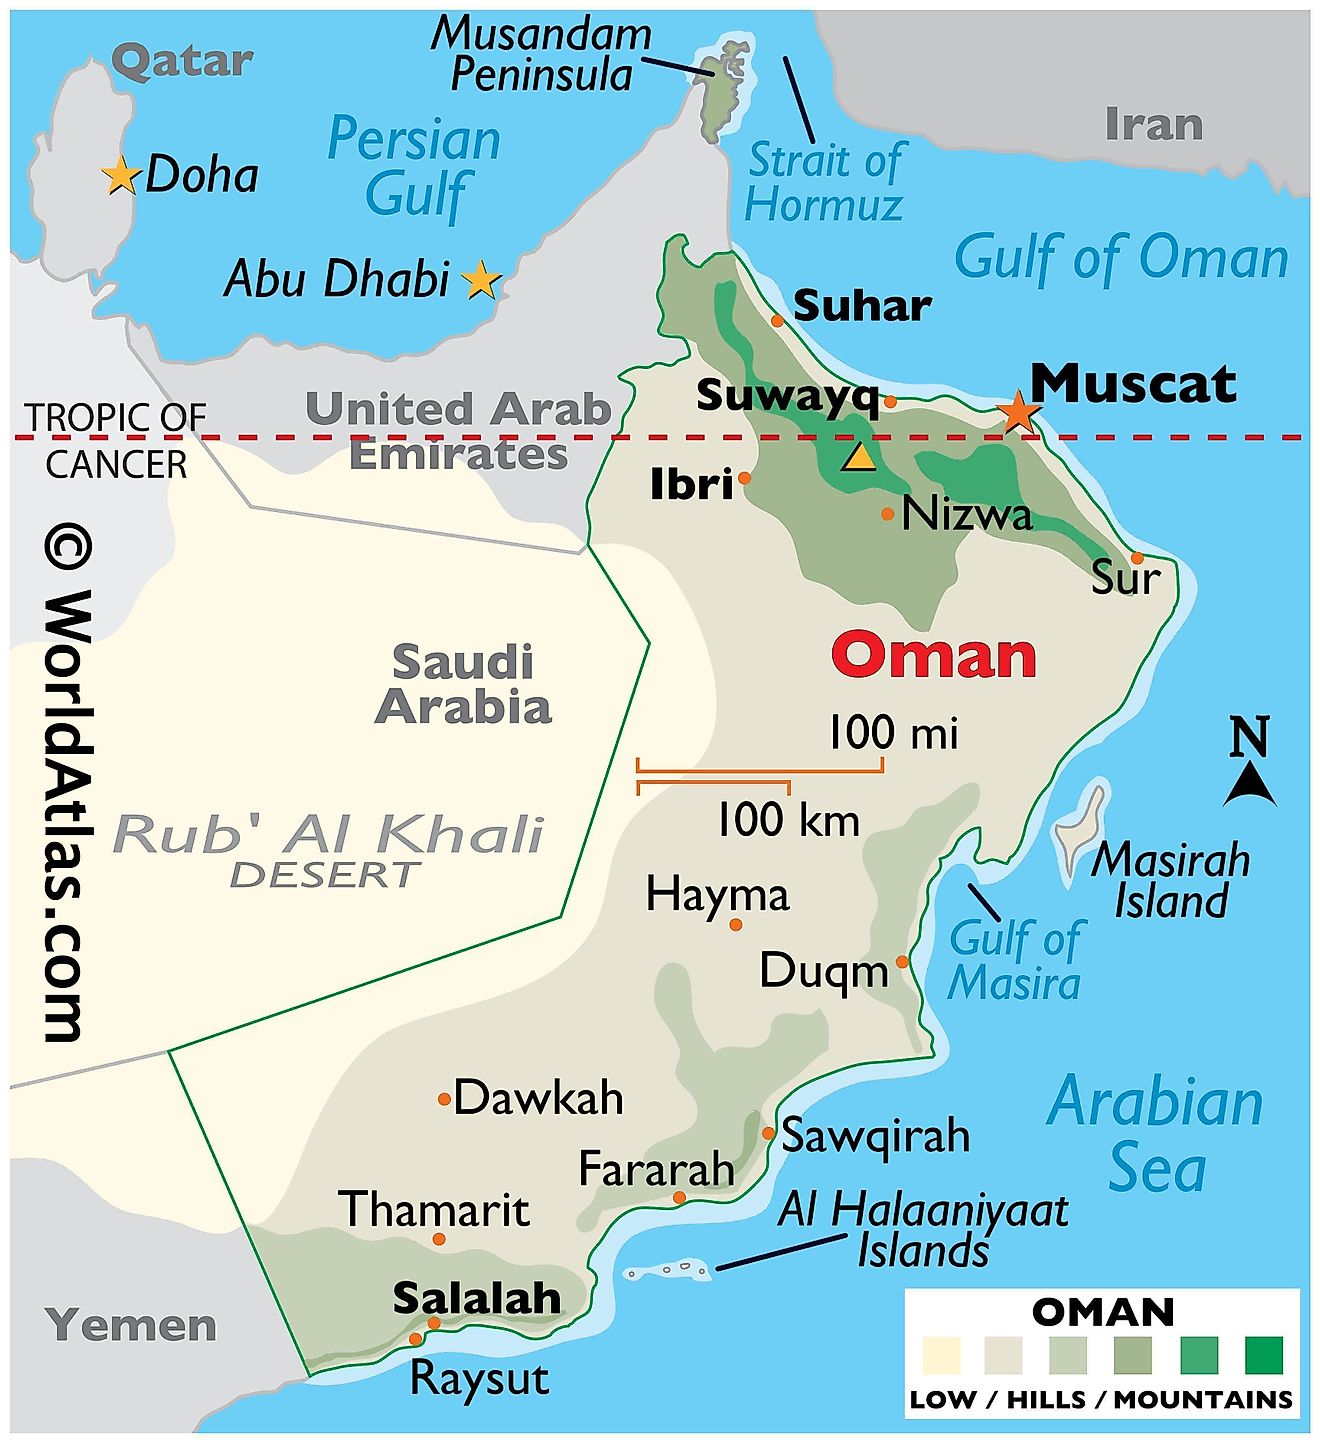 Physical Map of Oman showing state boundaries, relief, highest point, important cities, Musandam Peninsula, islands, etc.